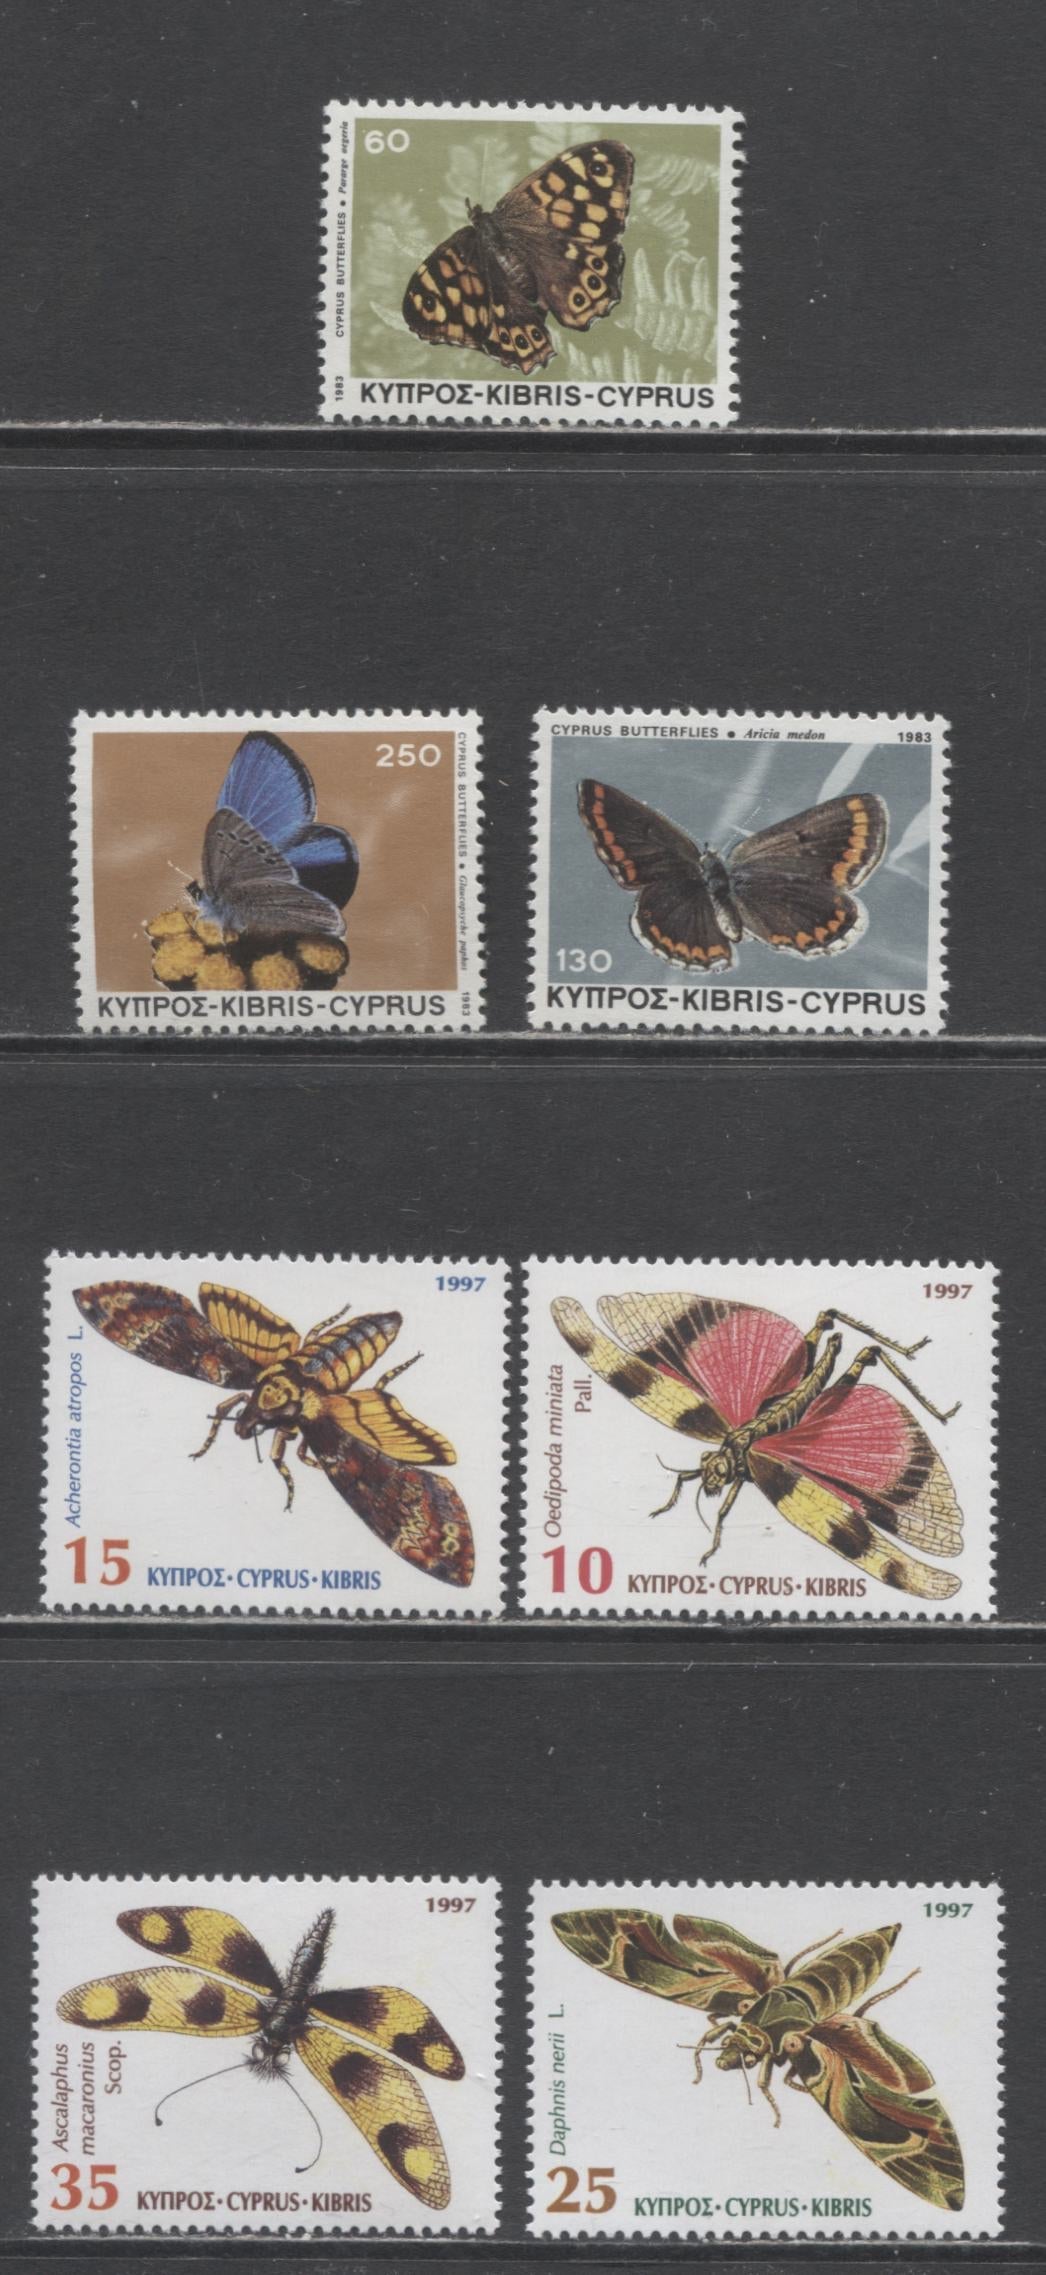 Lot 194 Cyprus SC#597/908 1983-1997 Butterfly & Insect Issues, 7 VFNH Singles, Click on Listing to See ALL Pictures, 2017 Scott Cat. $8.05